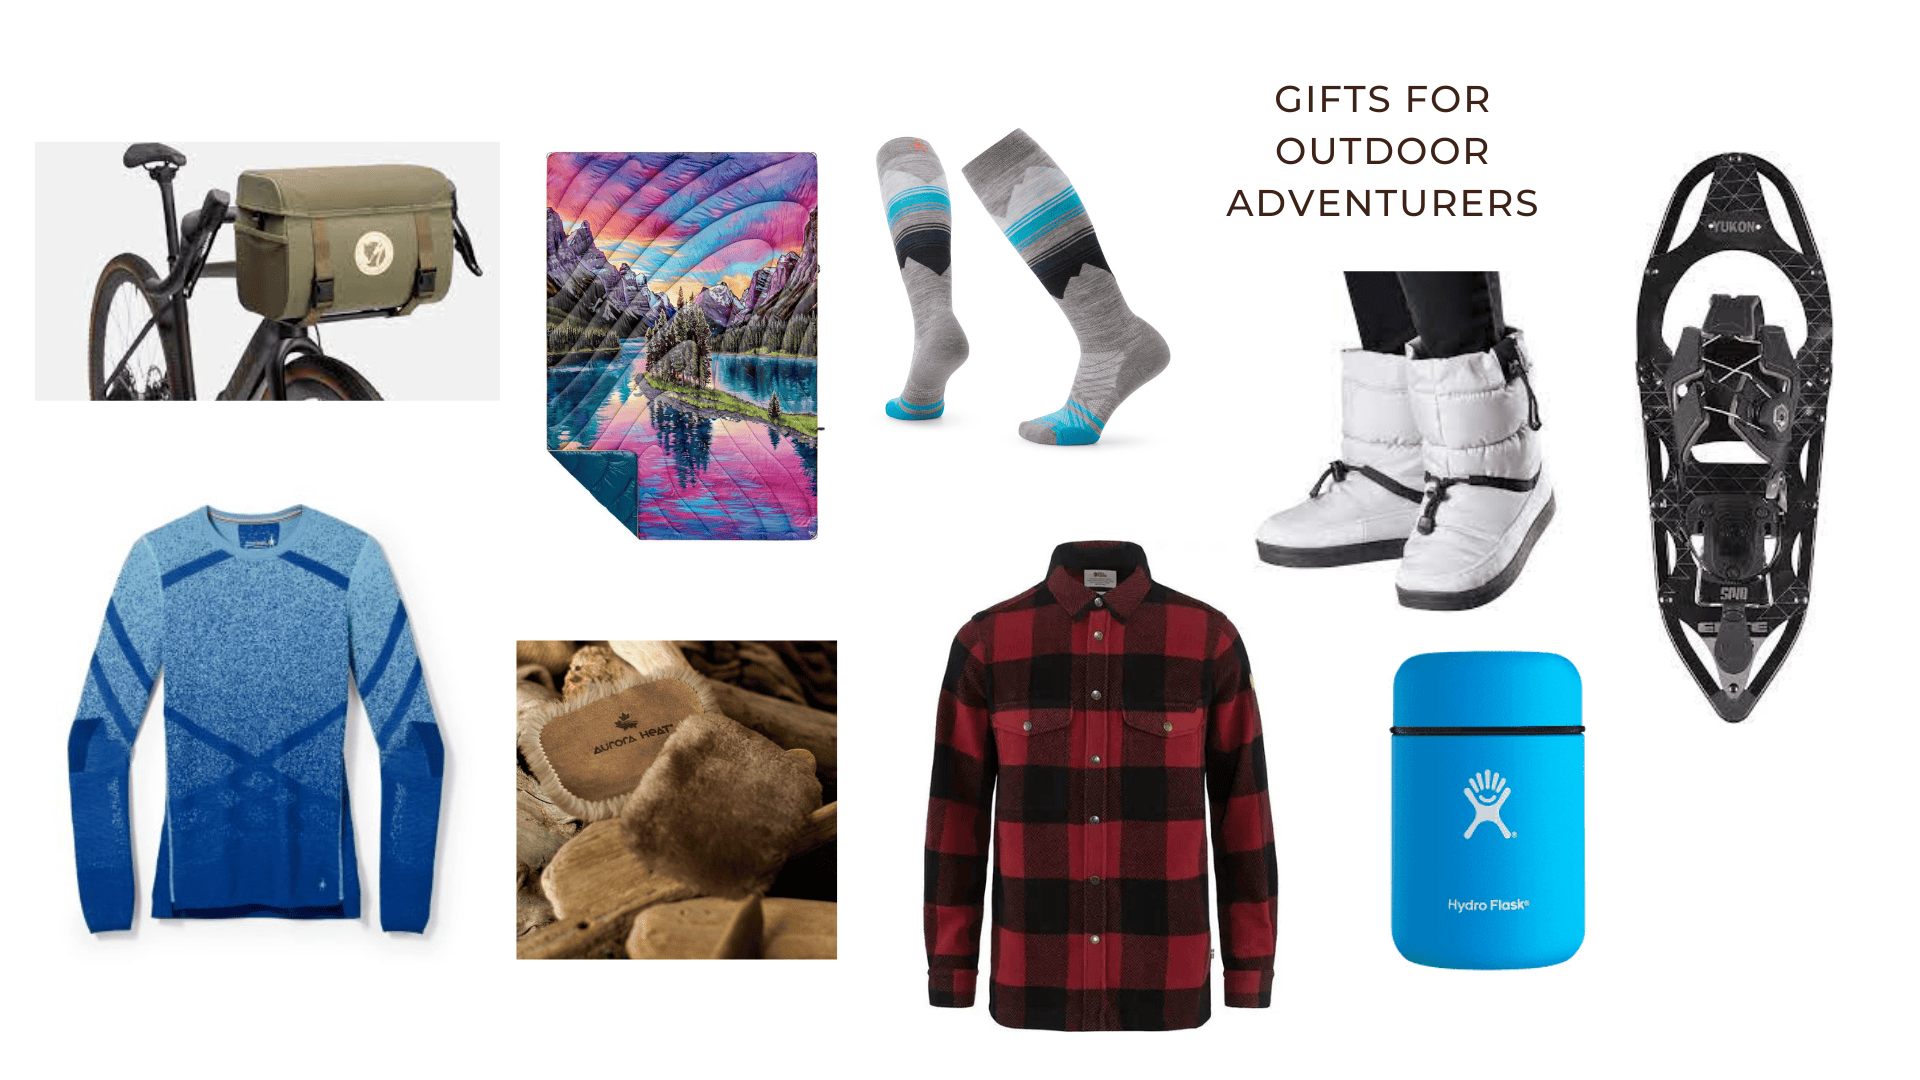 2022 Holiday Gift Guide for Outdoor Adventurers & Giveaways - Play Outside  Guide